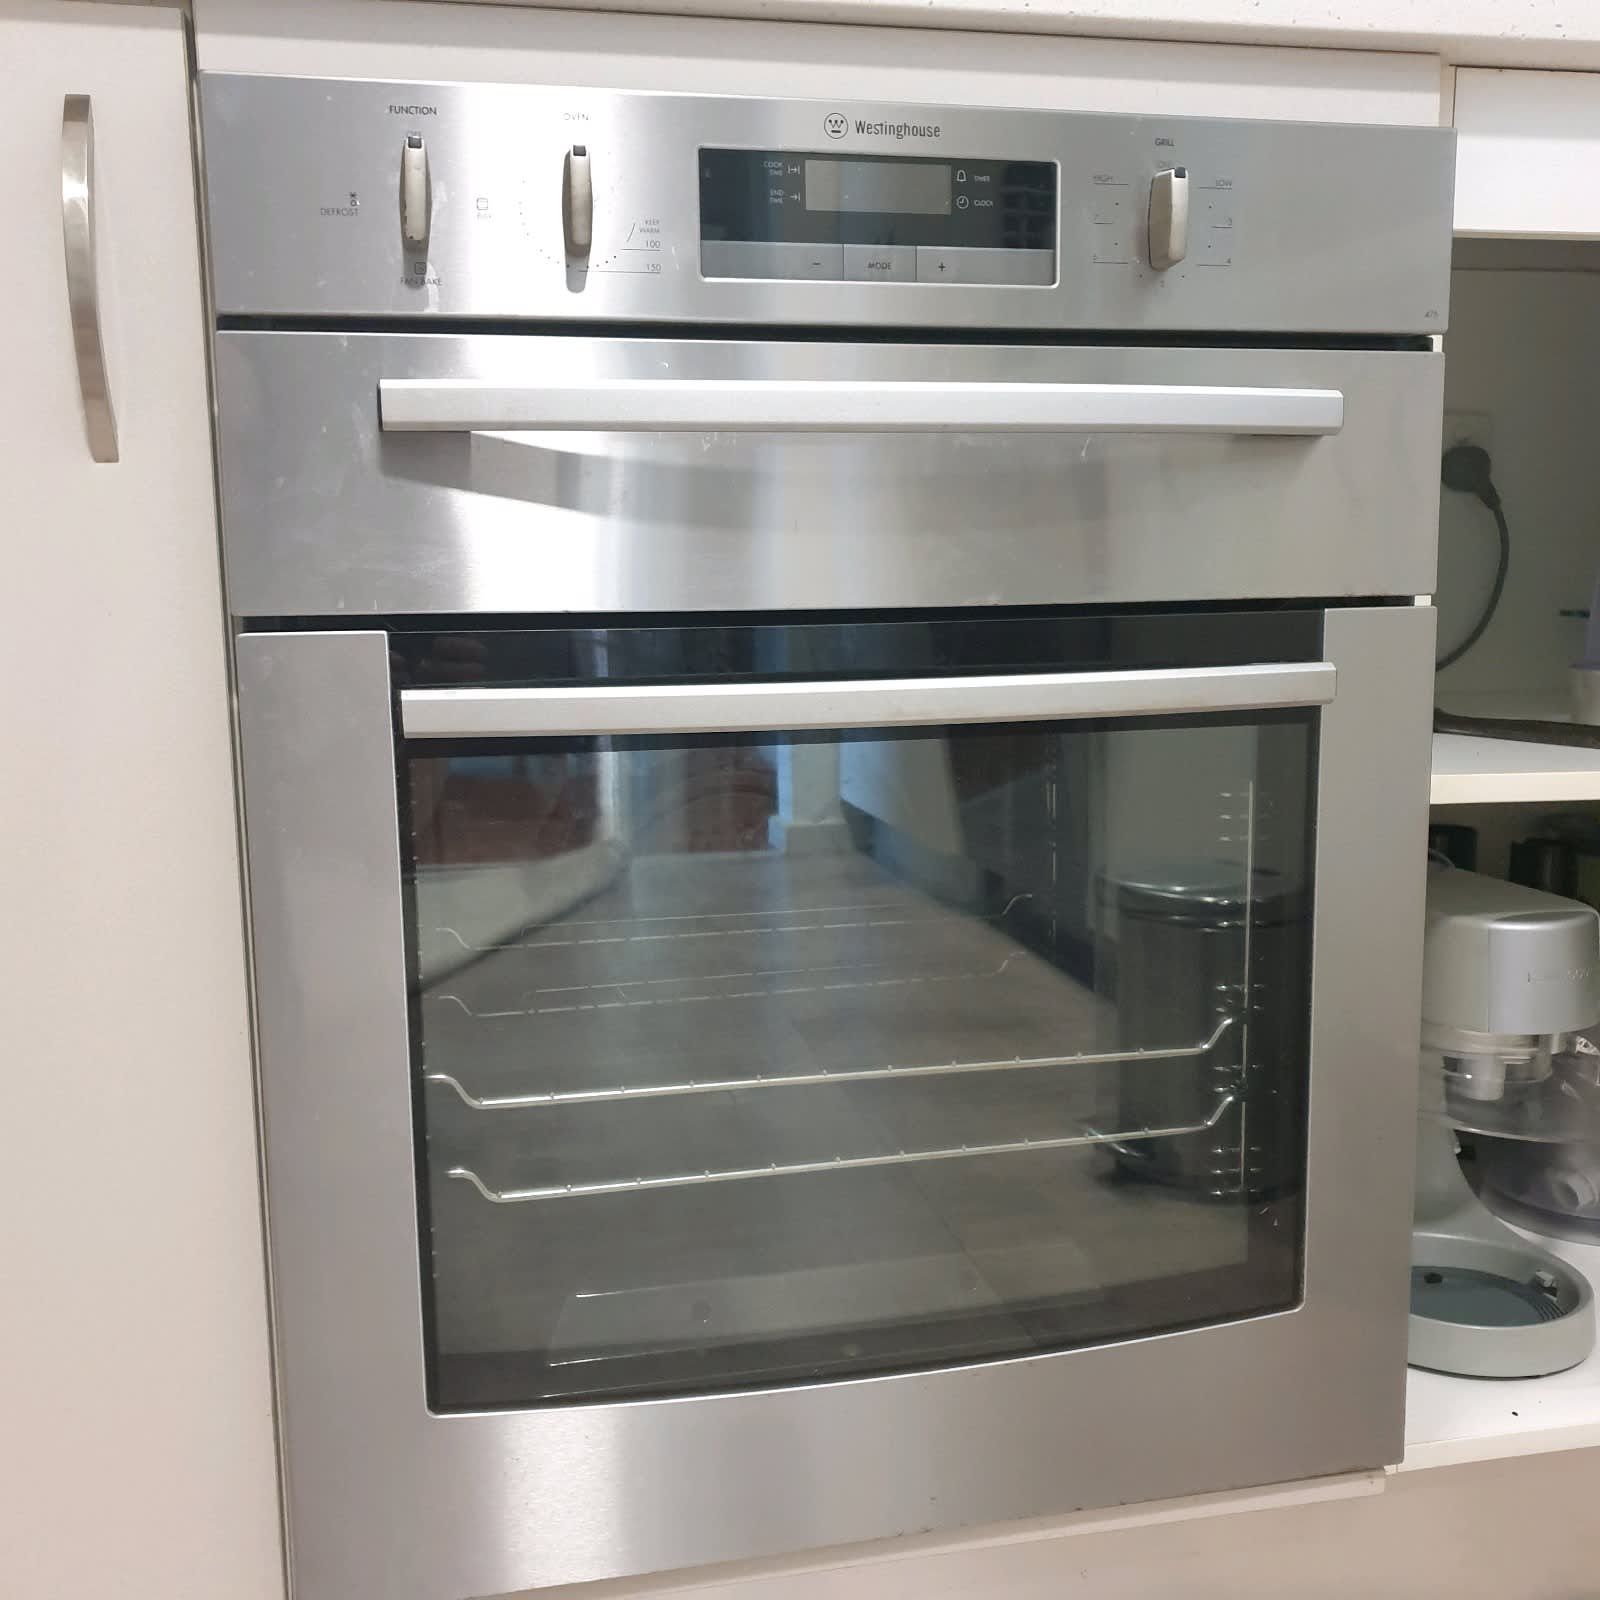 Westinghouse 60cm Freestanding Electric Oven/Stove WFE647SA